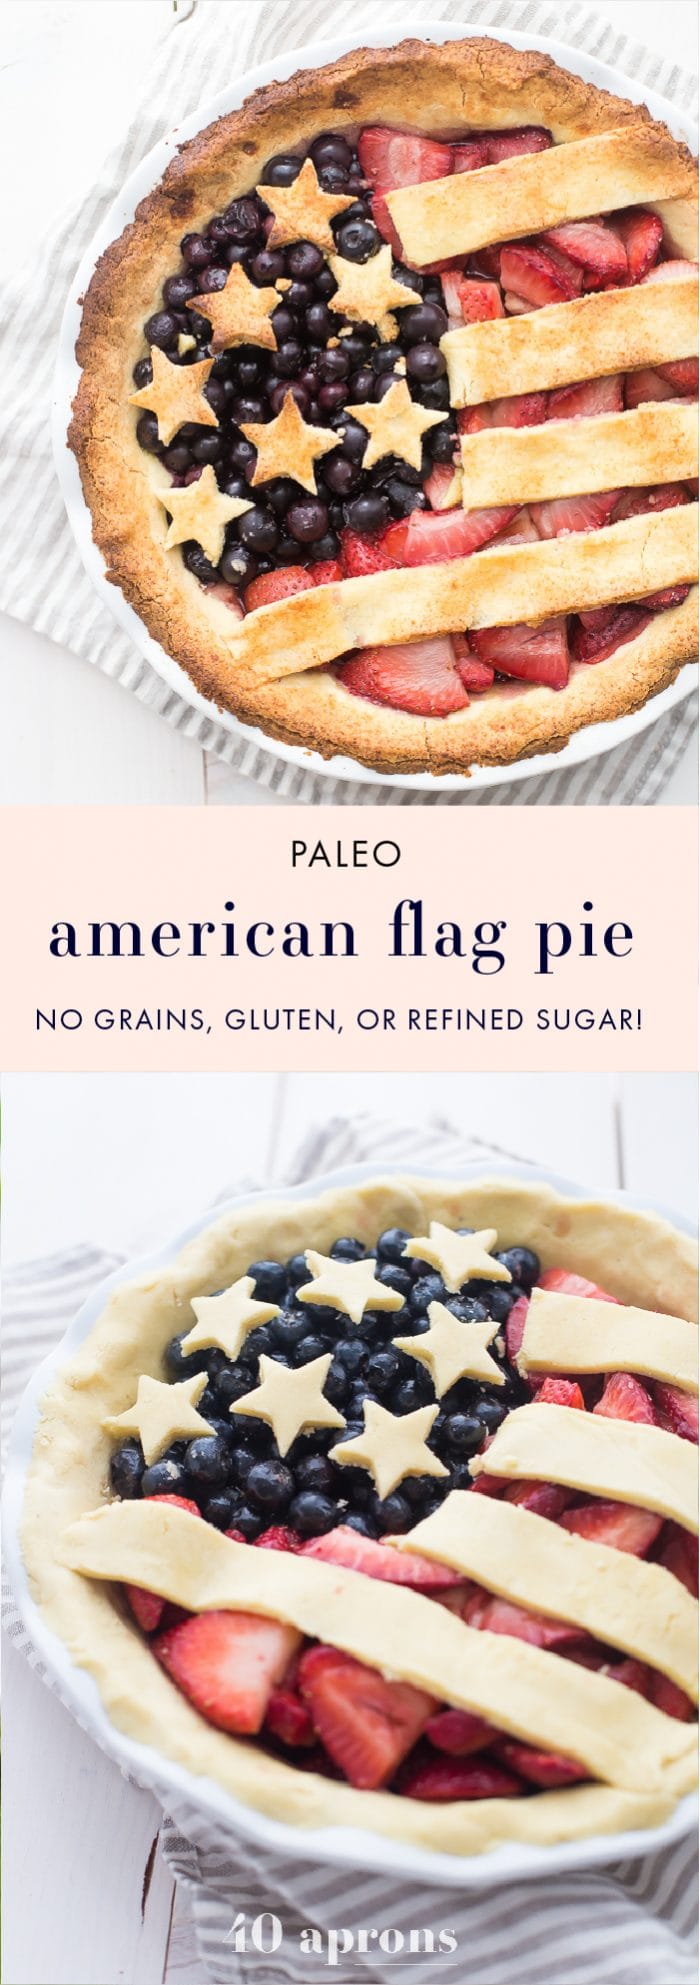 This paleo American flag pie is the absolute perfect paleo 4th of July dessert. Full of fresh strawberries and blueberries with a crunchy crust, it's a stellar paleo pie that's just stunning. Is there a better paleo pie for the ultimate paleo 4th of July dessert table? I think not! Also a great Memorial Day dessert or Labor Day dessert.